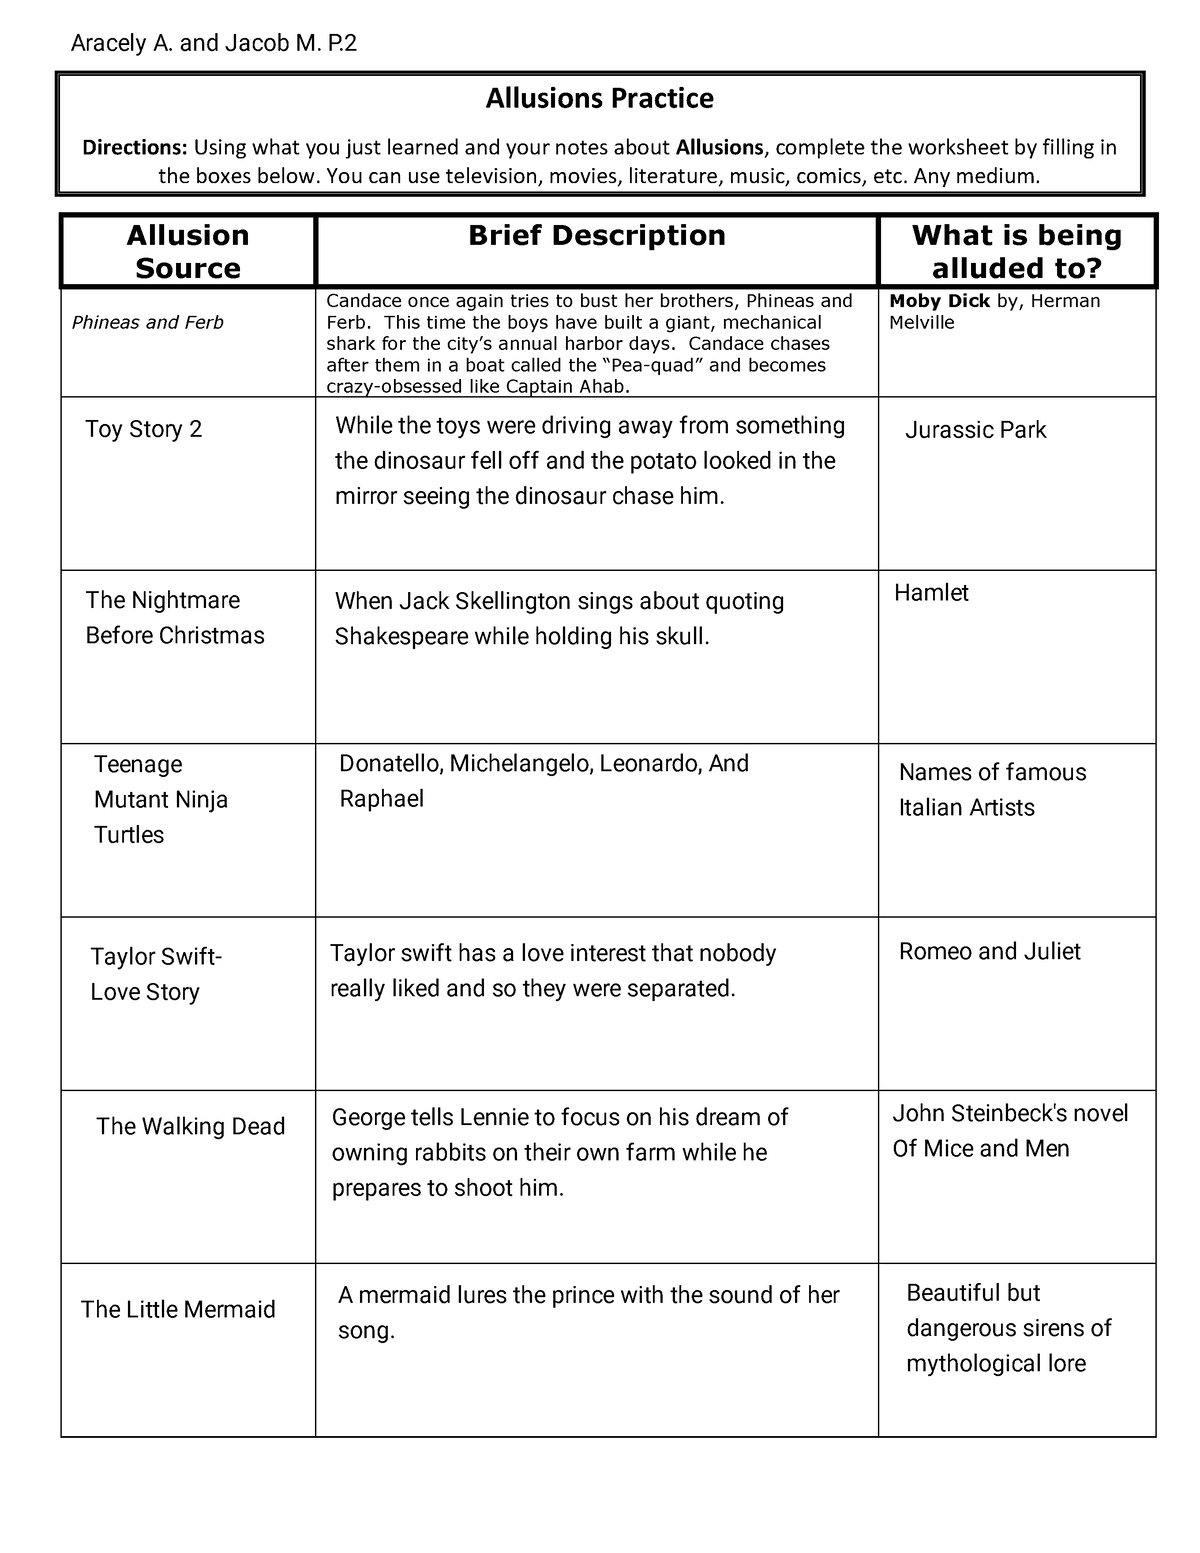 allusions-practice-worksheet-allusions-practice-directions-using